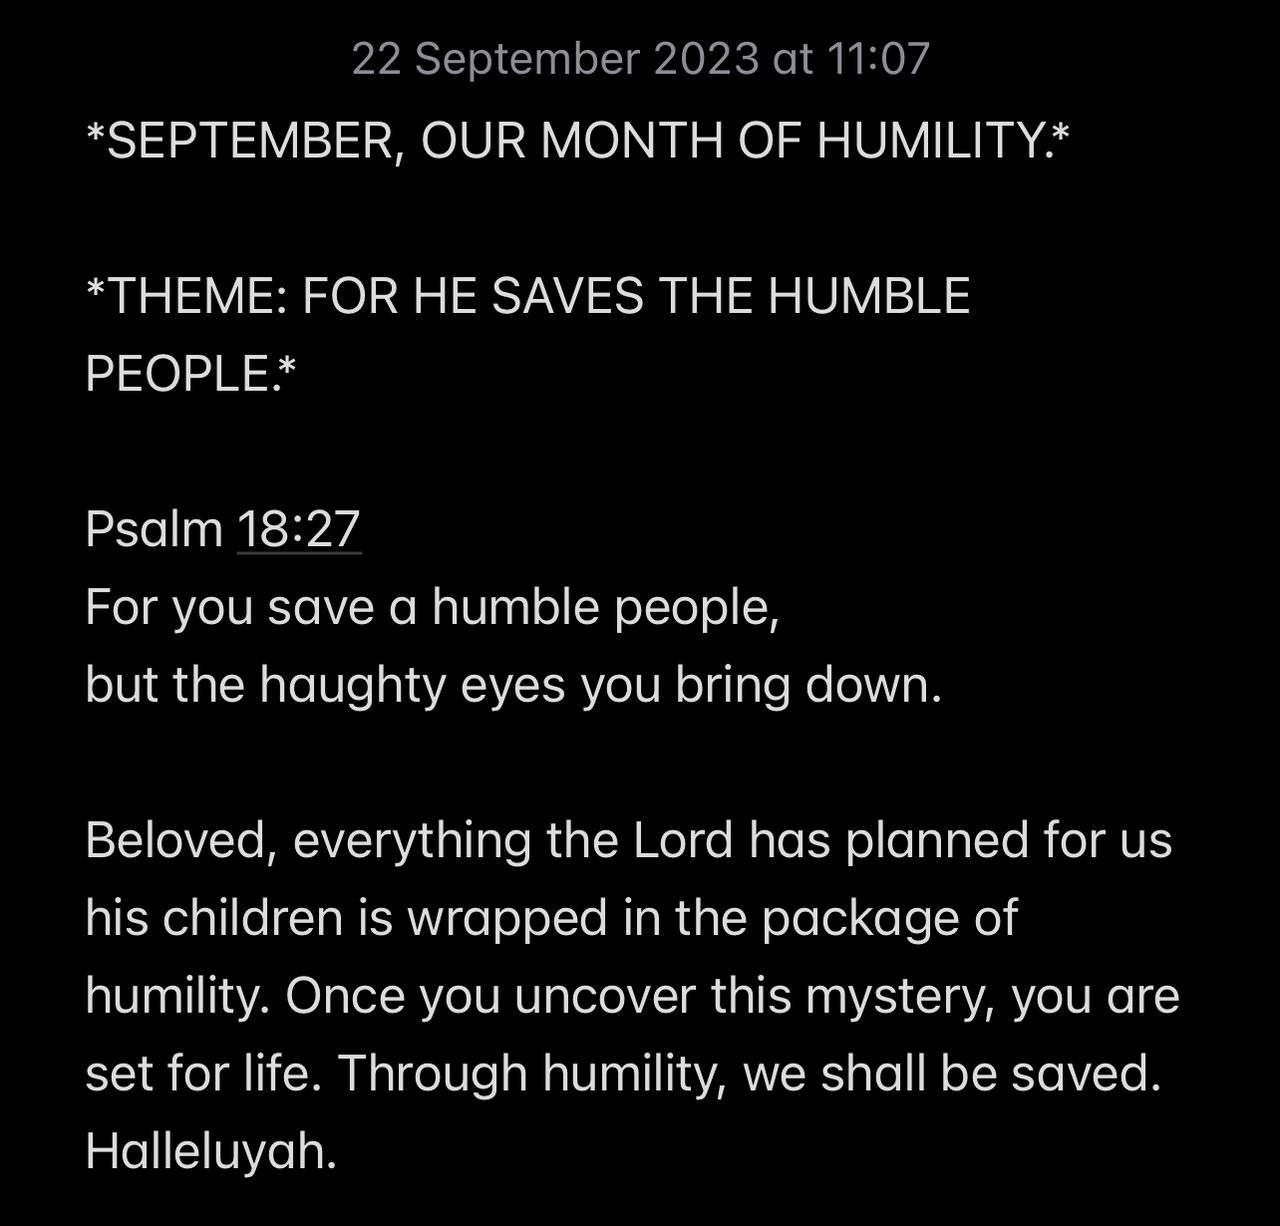 FOR HE SAVES THE HUMBLE PEOPLE.